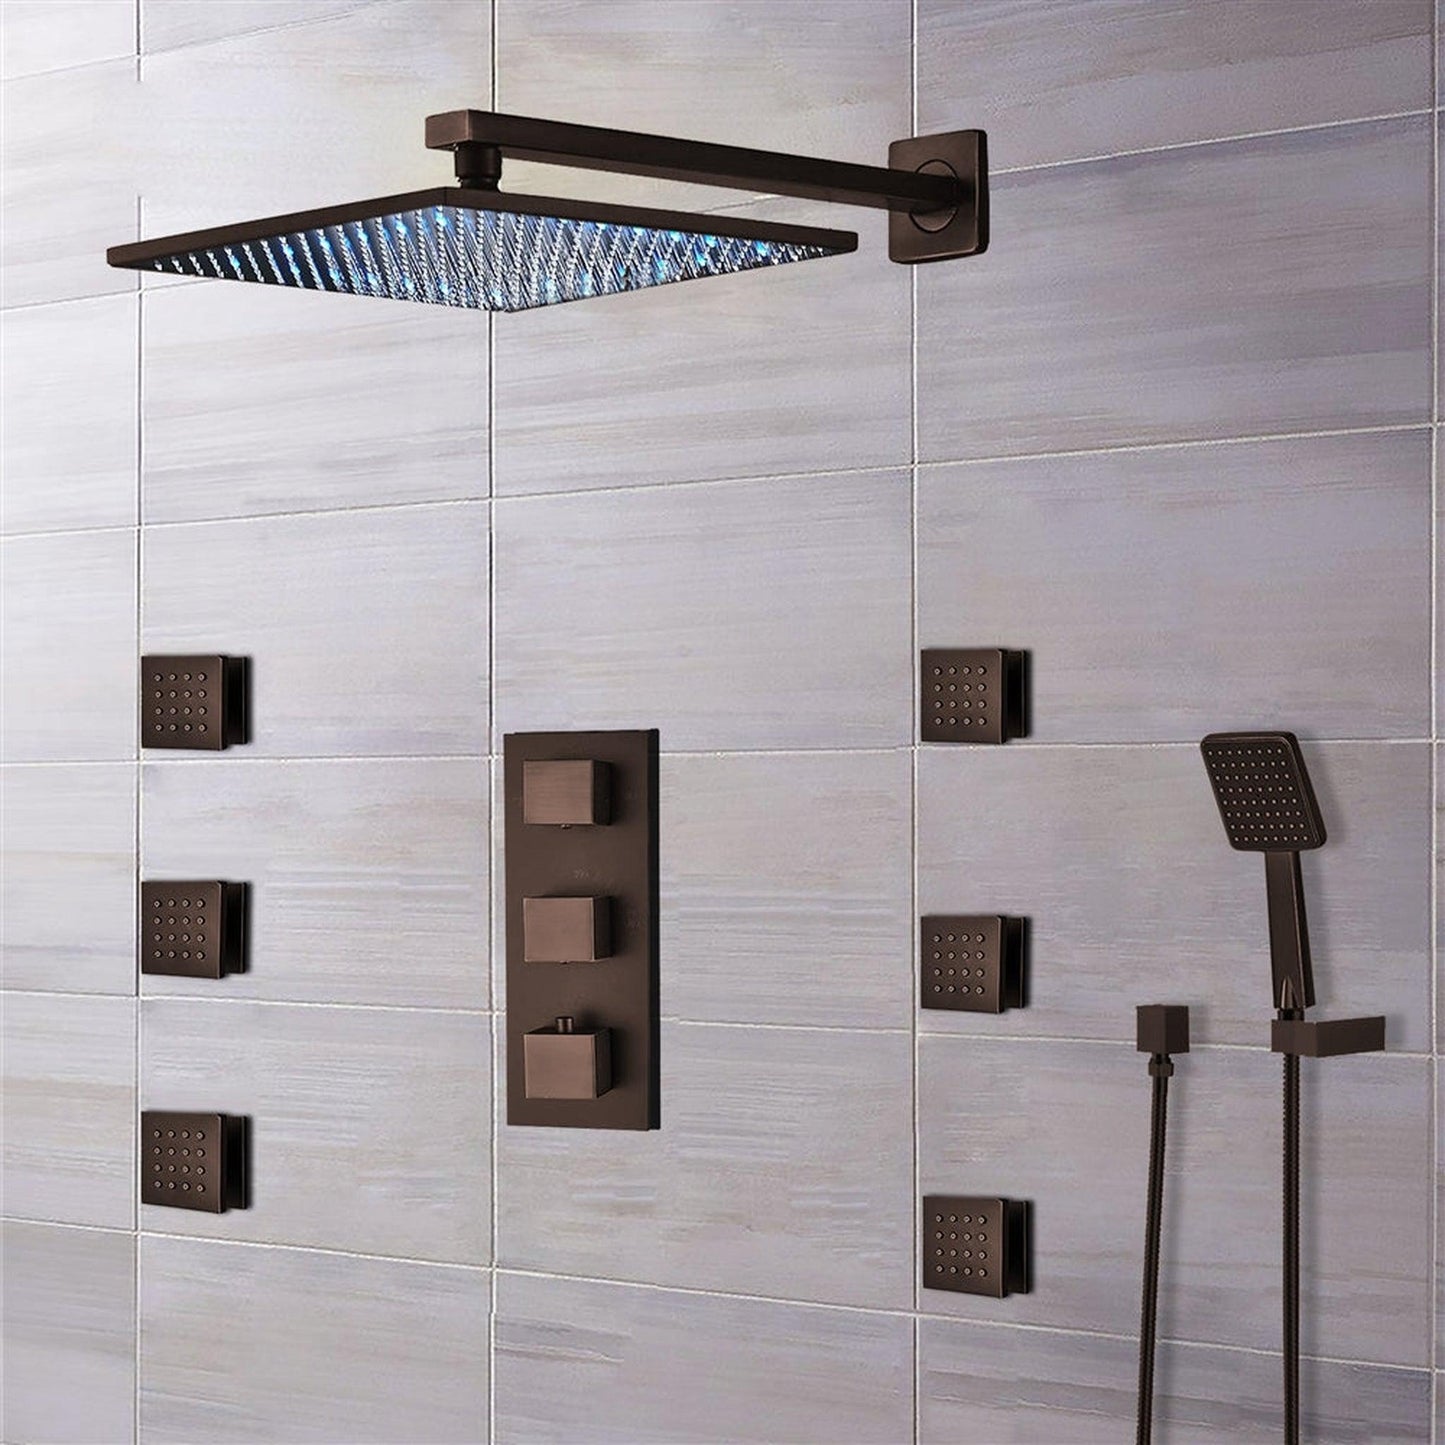 Fontana Sierra 20" Light Oil Rubbed Bronze Round Ceiling Mounted LED Shower System With 6-Jet Body Sprays and Hand Shower